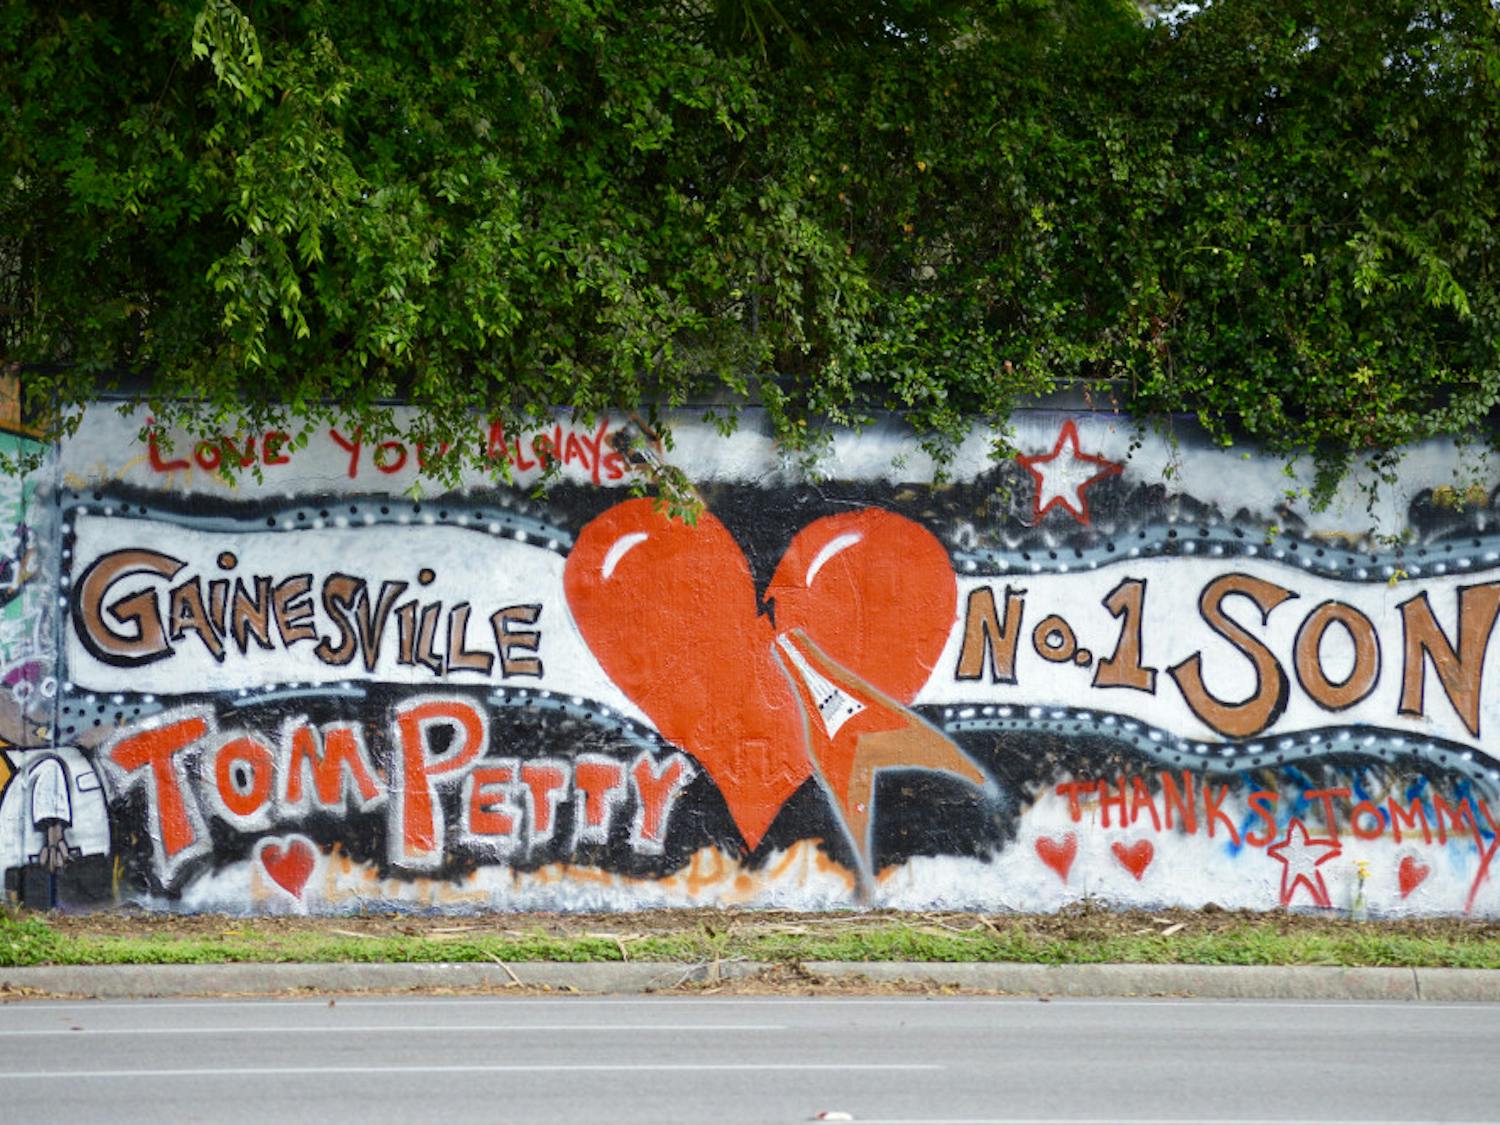 A mural dedicated to Gainesville native Tom Petty appeared on the 34th Street Wall in Gainesville, Florida following the death of the musician.